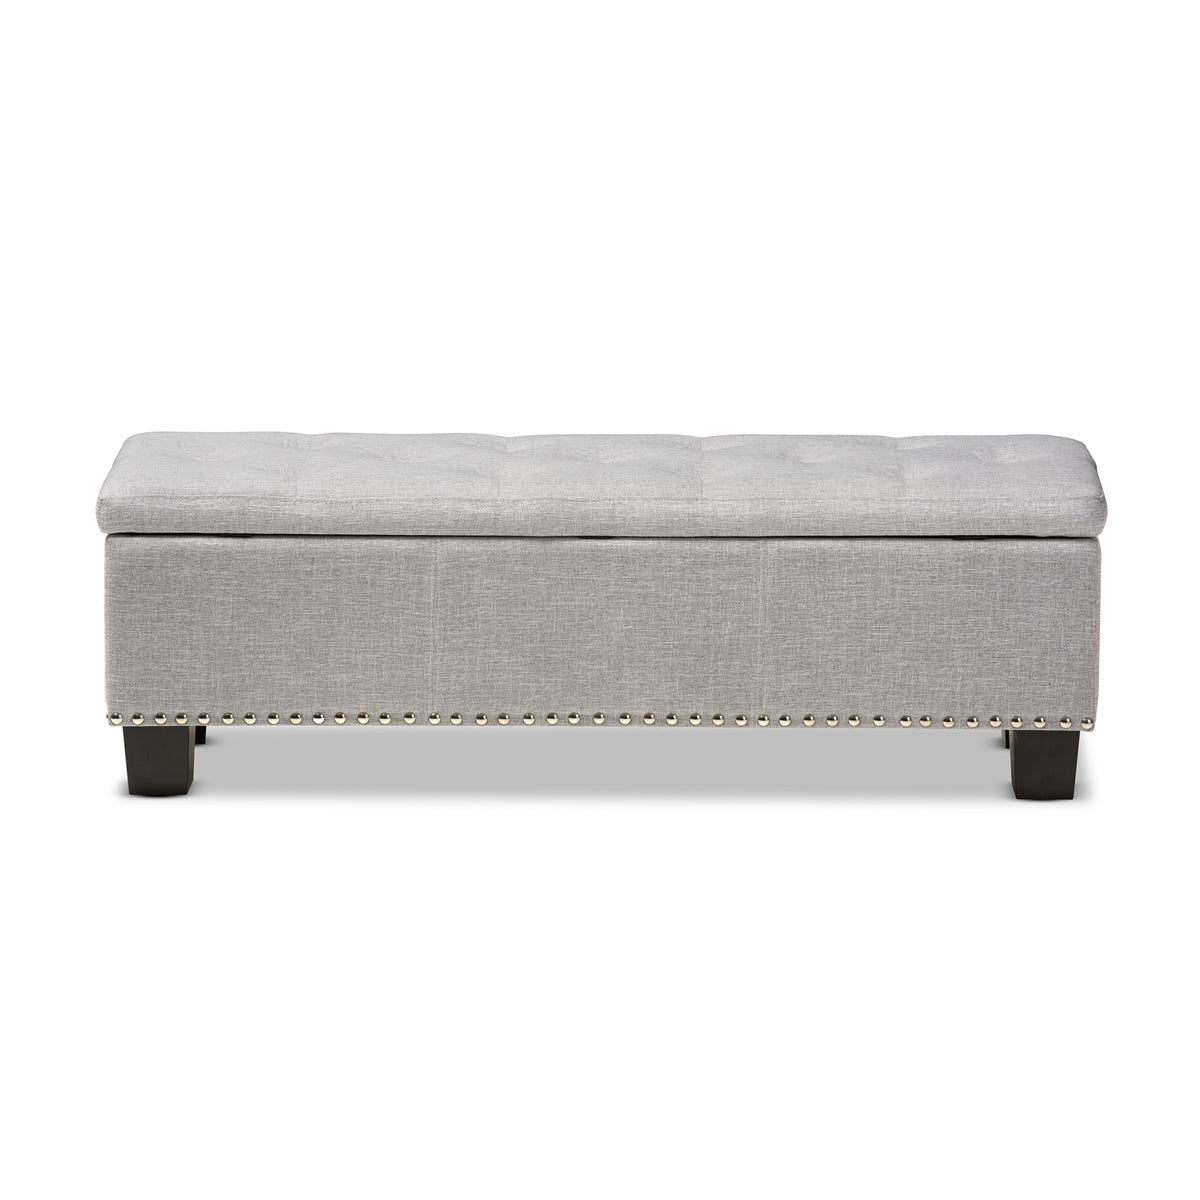 Baxton Studio Hannah Modern and Contemporary Grayish Beige Fabric Upholstered Button-Tufting Storage Ottoman Bench Baxton Studio-benches-Minimal And Modern - 6